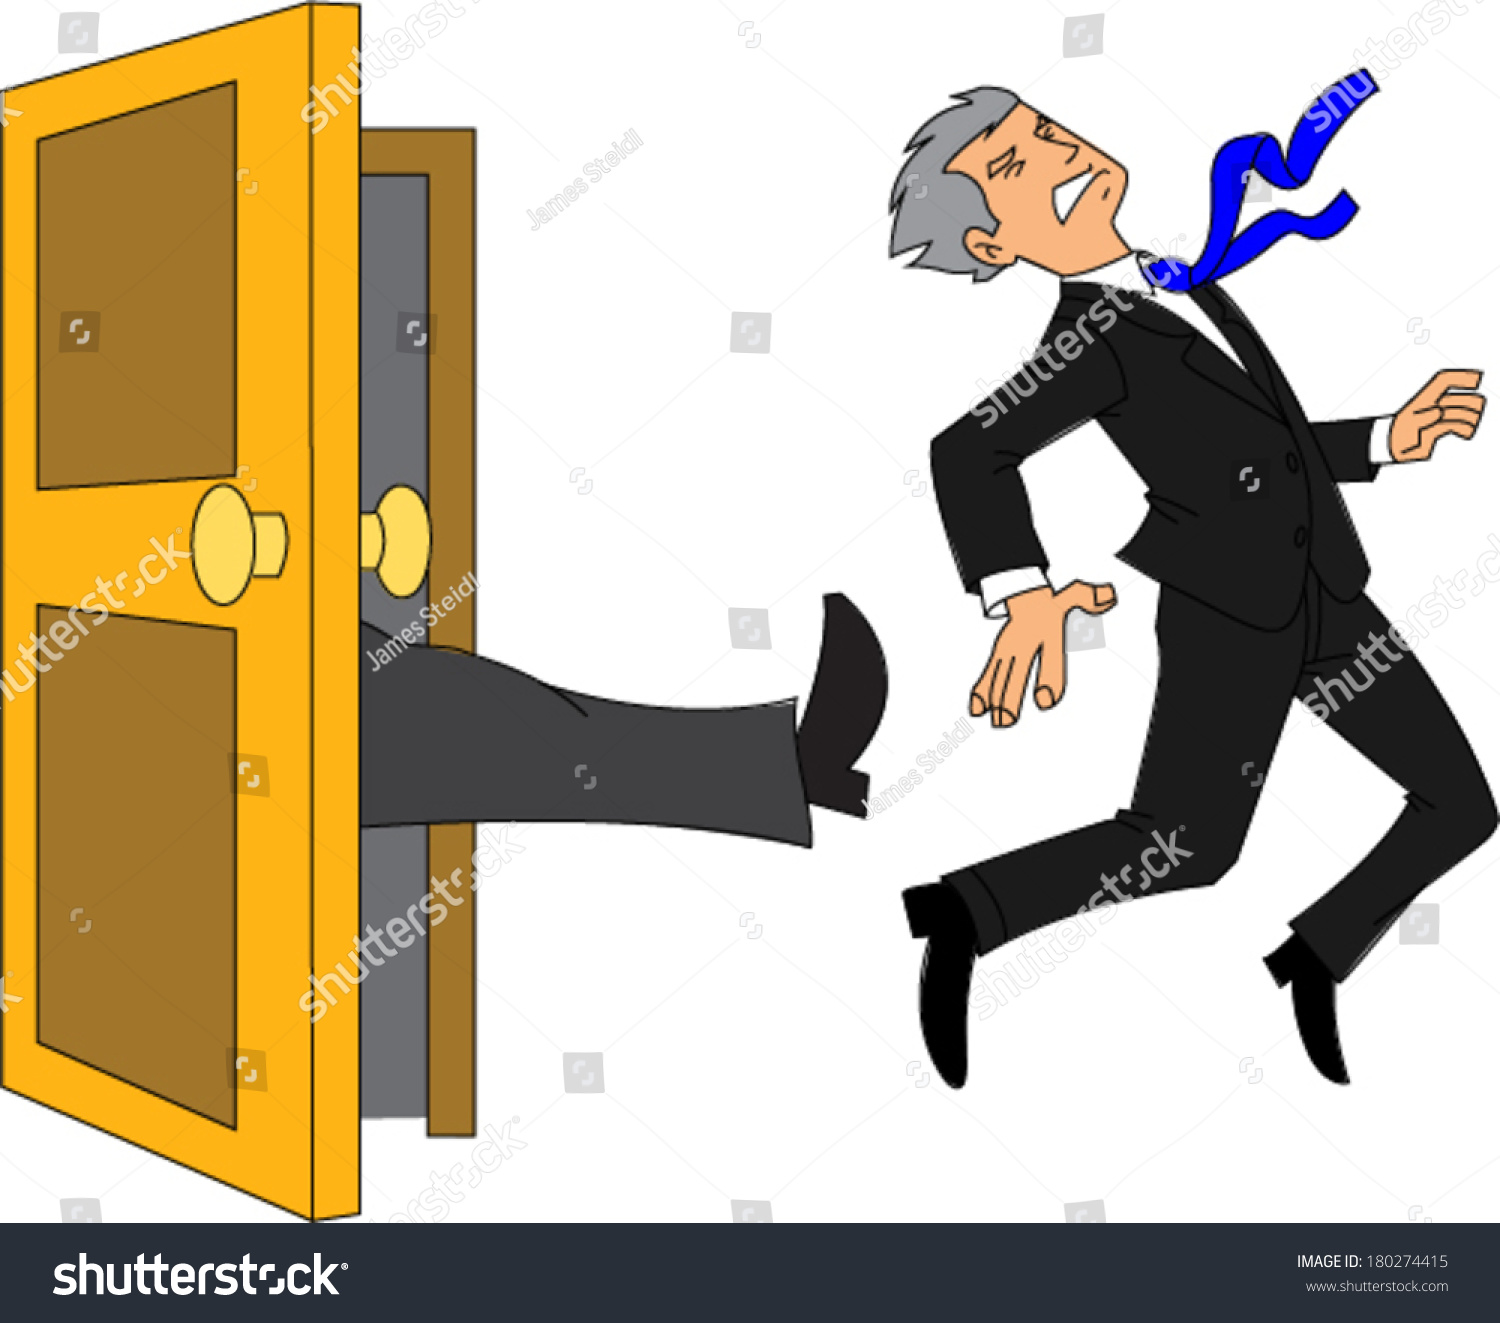 stock-vector-businessman-being-kicked-out-of-the-door-180274415.jpg